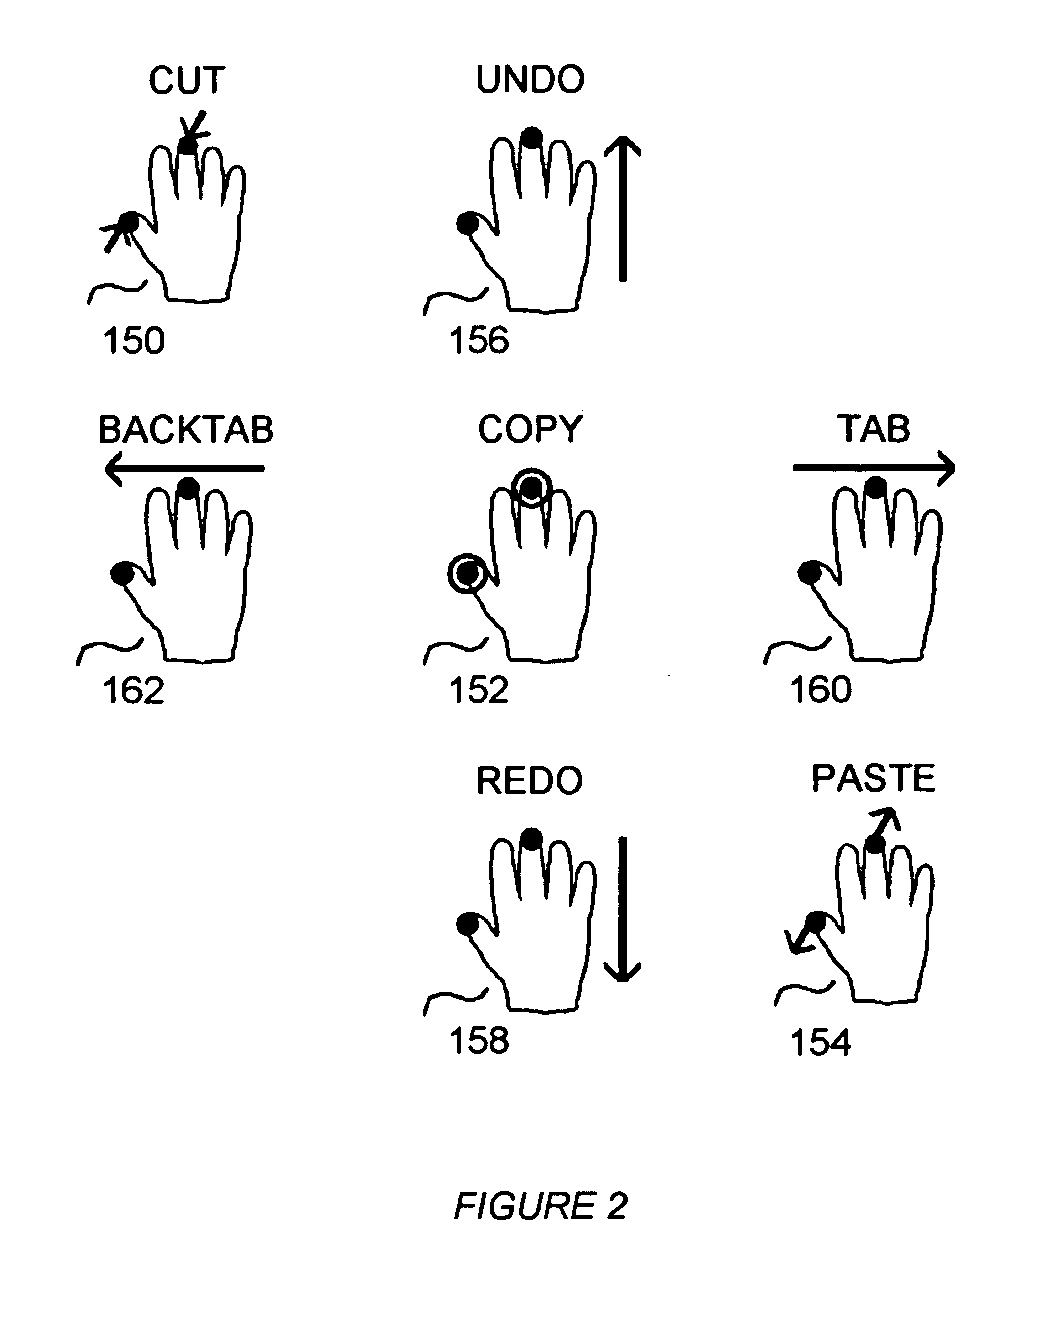 System and method for packing multi-touch gestures onto a hand